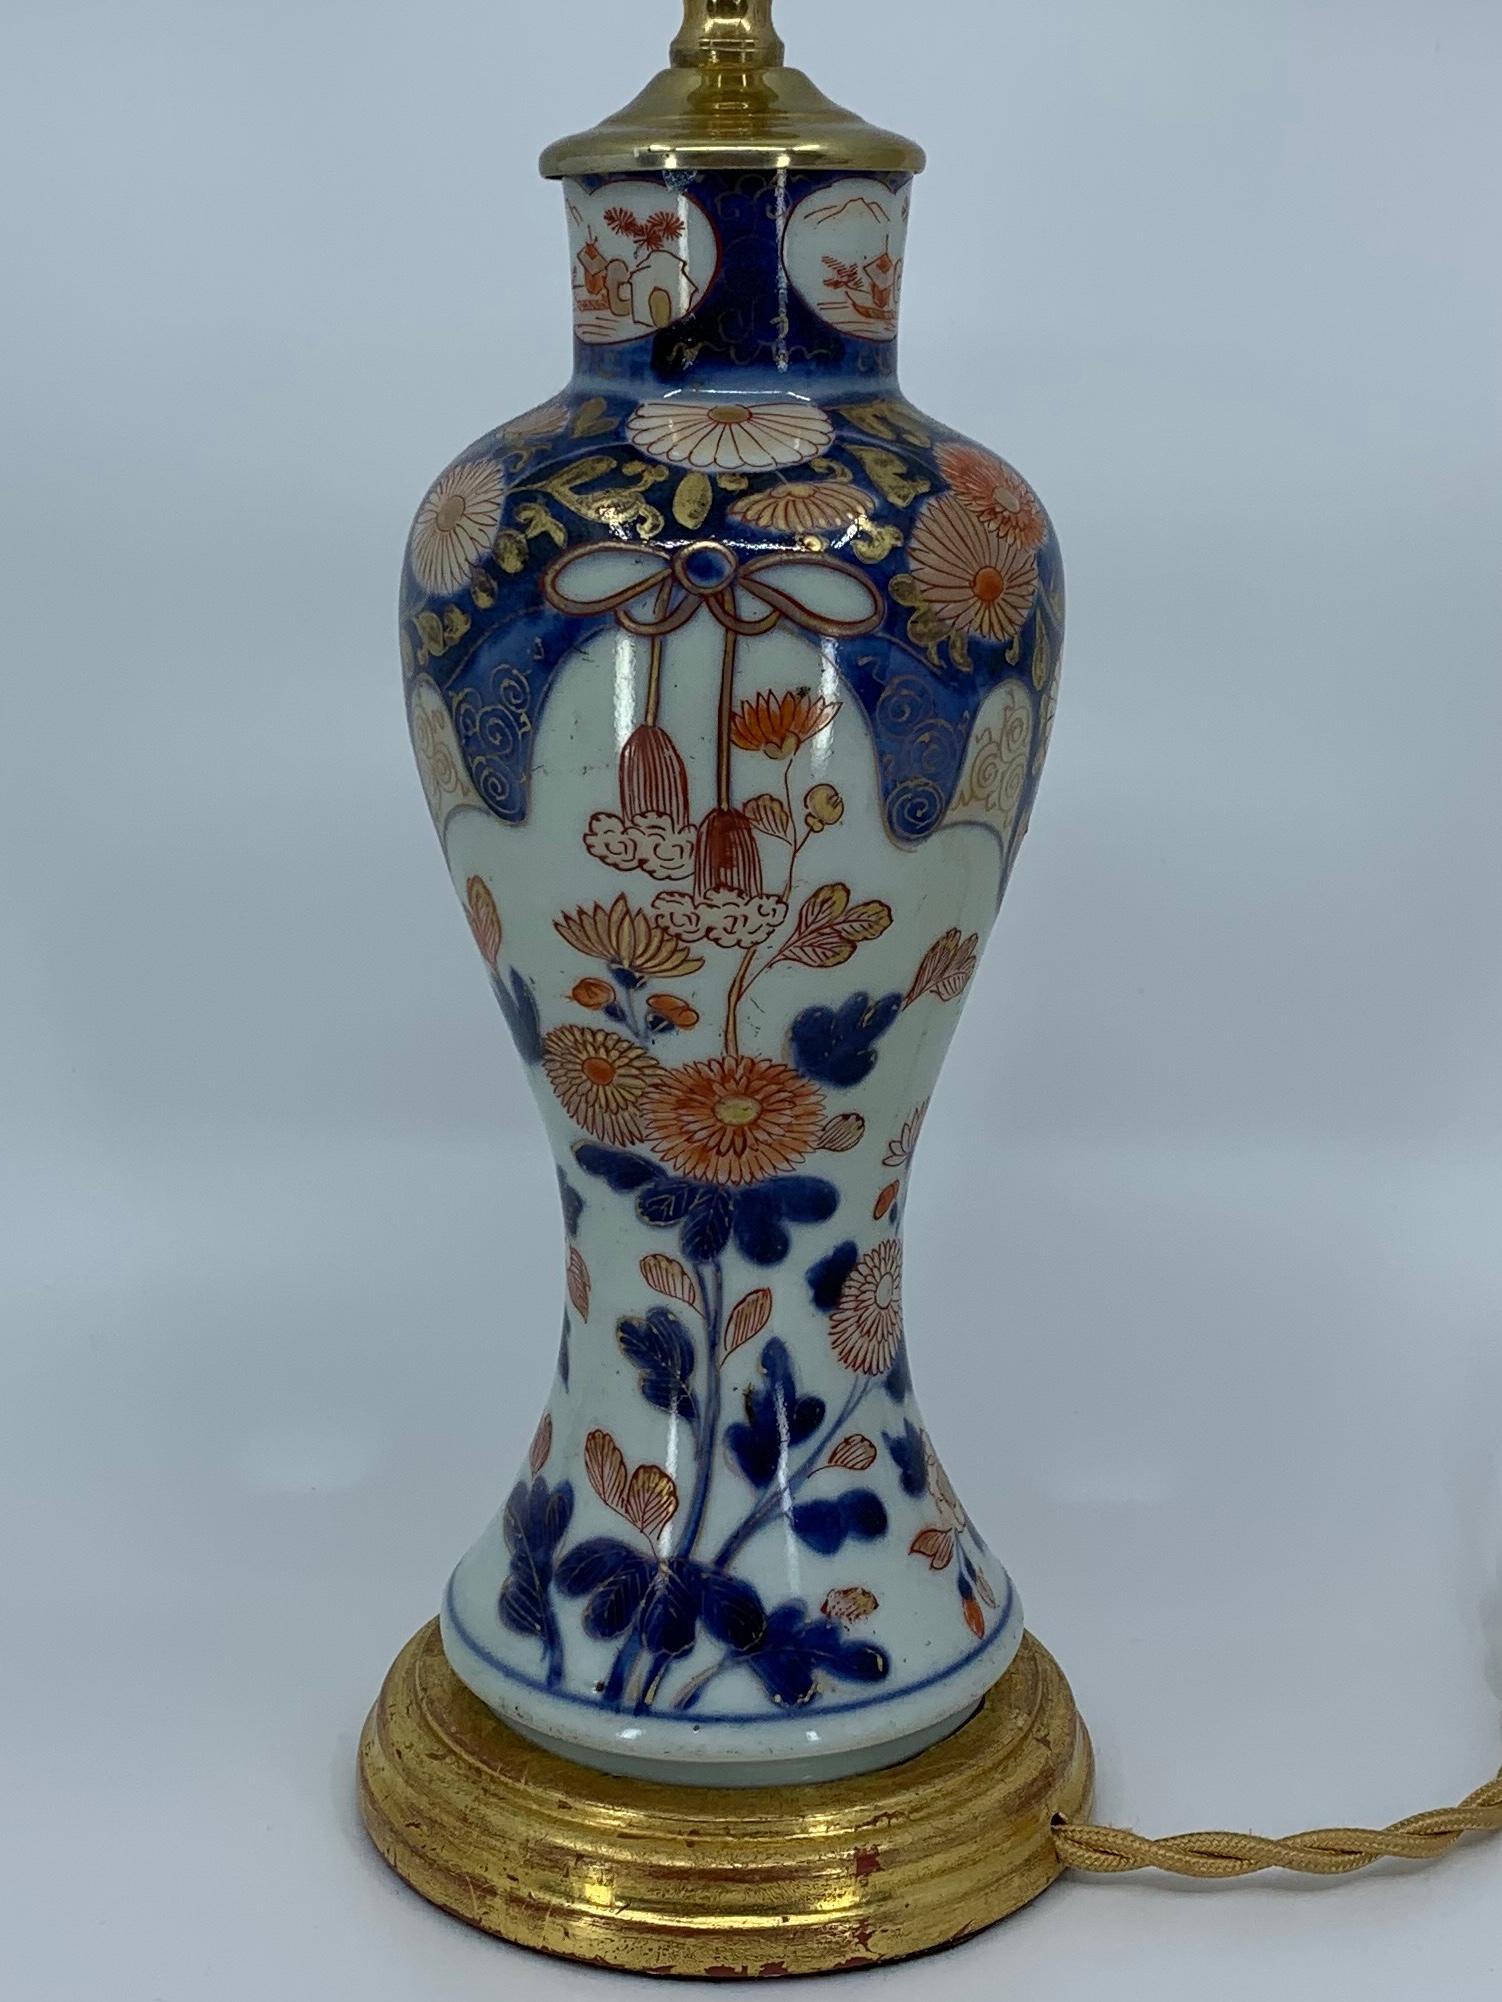 Blue, white, red and gilt porcelain lamp on water giltwood base. Chinese porcelain vase converted into a lamp in blue, white, red and gilt floral on water gilt base. Newly electrified with gold silk with switch. China, late 19th century
Dimensions: